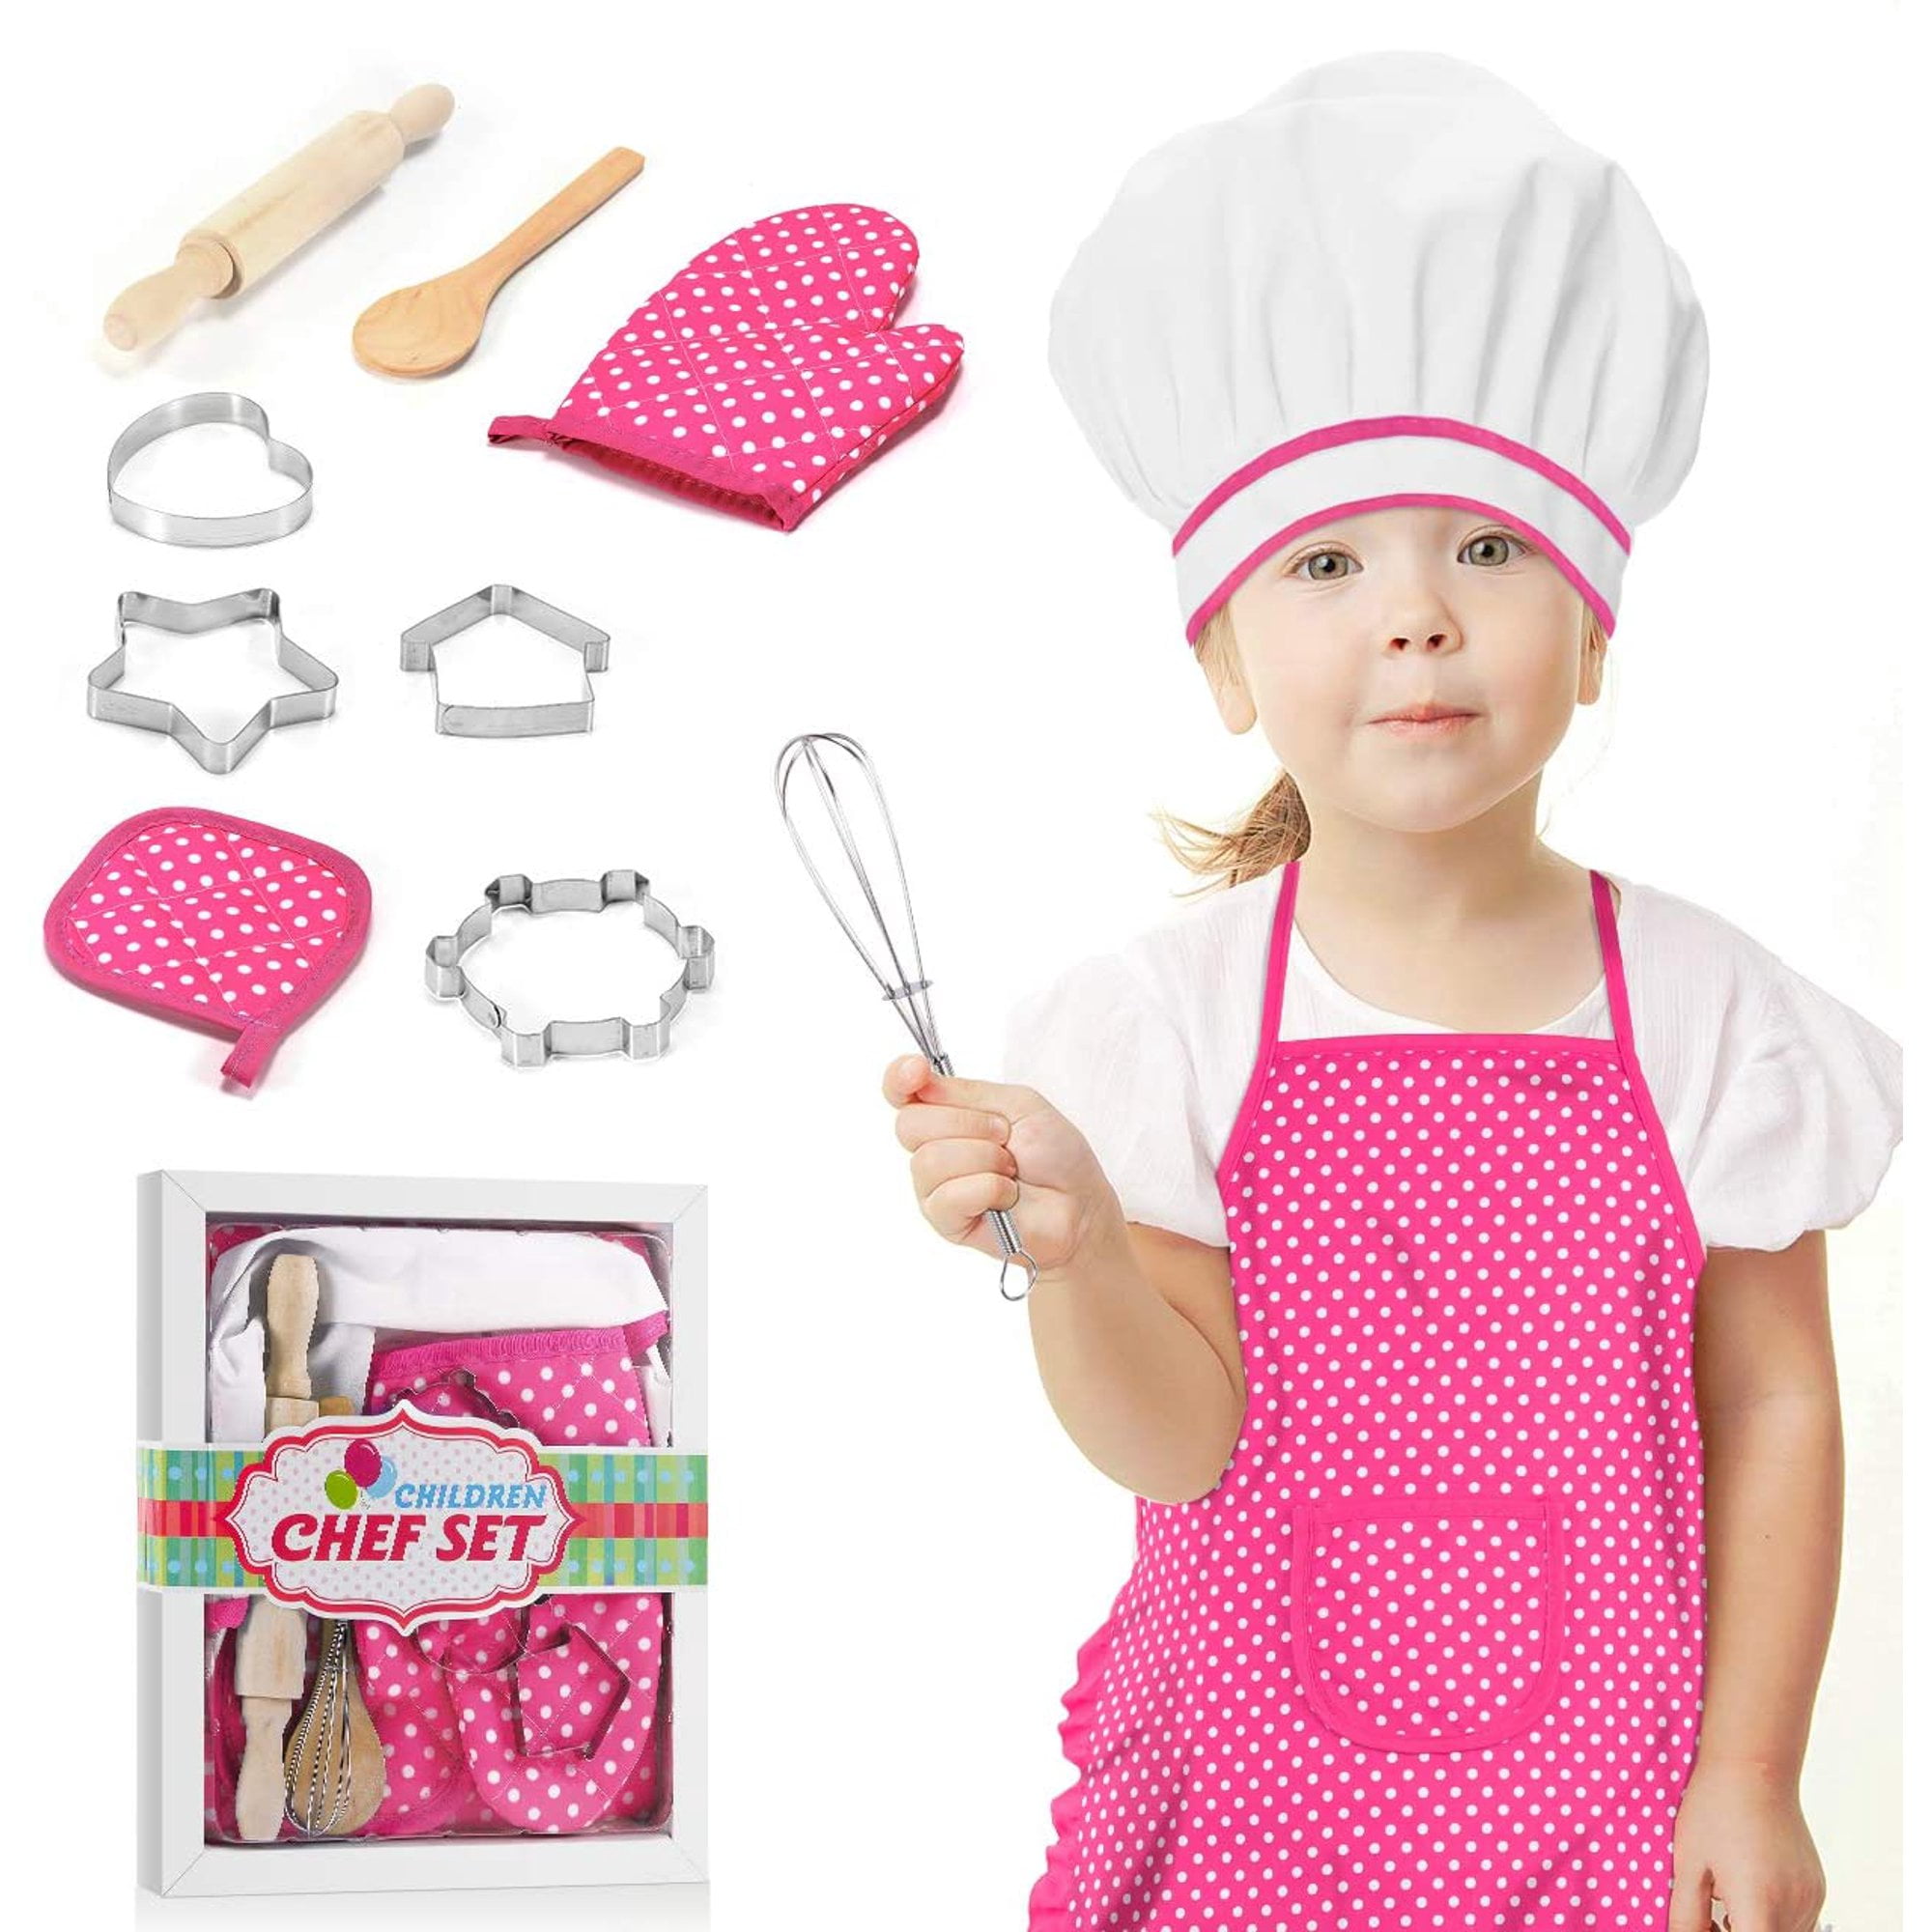 Cupcake Chef Set for Kids Cooking Chef Set Great Gift for Children Pretend Play Play Set with Apron for Girls,Chef Hat and Other Accessories for Toddler,Career Role Play Size Medium 5-12 11 Pcs 